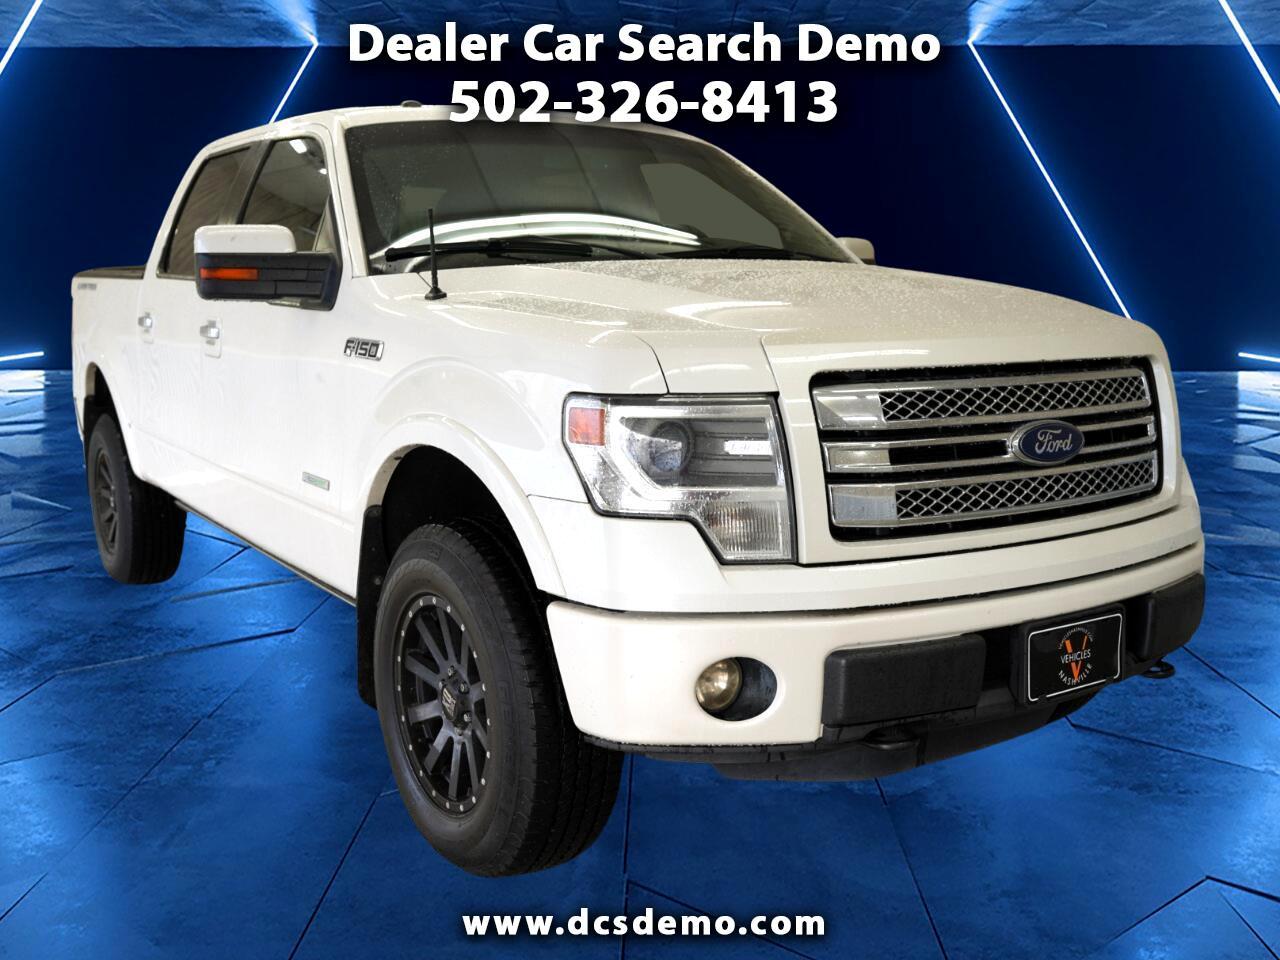 2013 Ford F-150 4WD SuperCrew 145" Limited